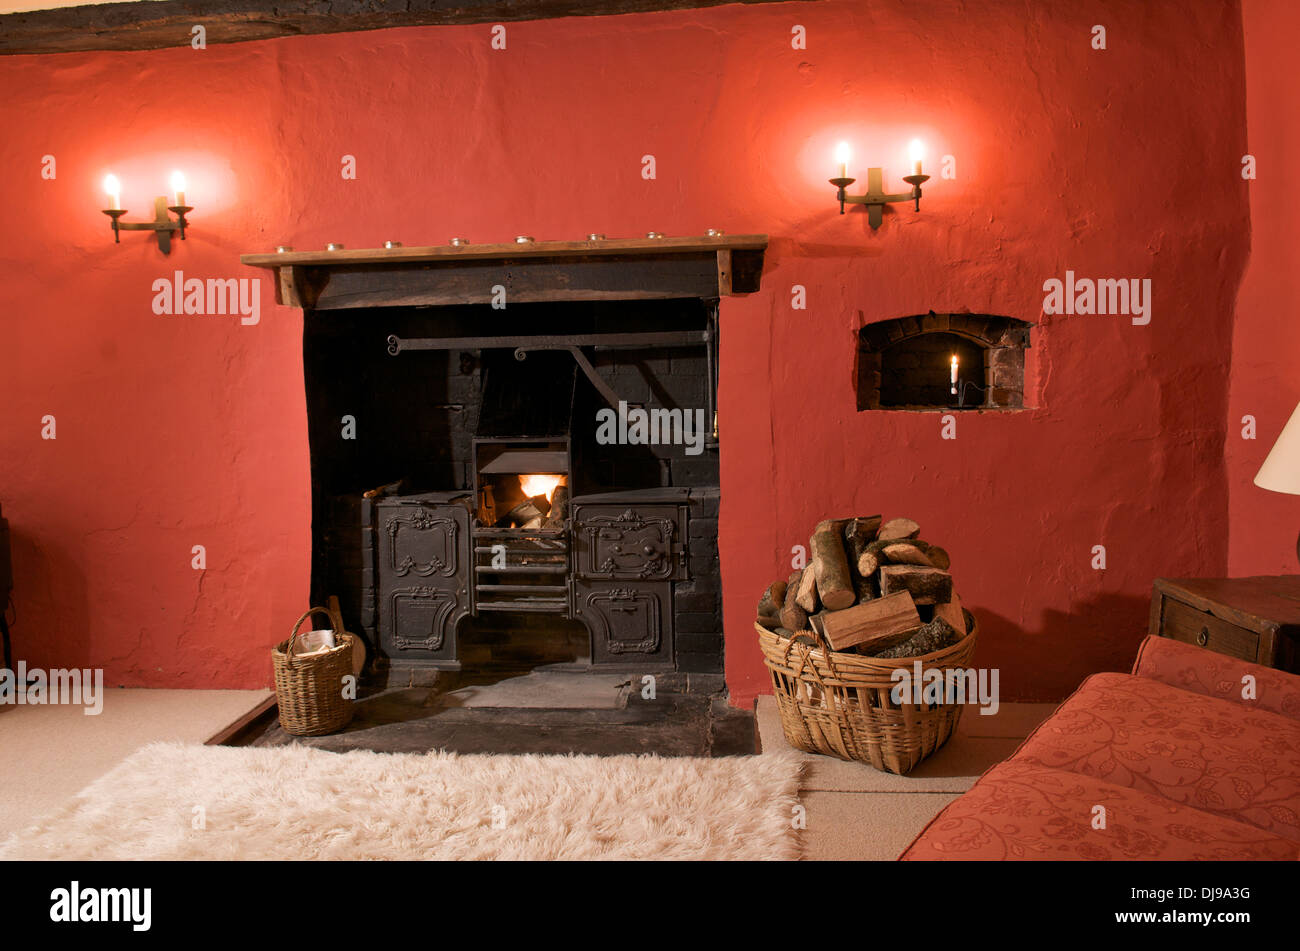 Old fashioned range in fireplace of holiday cottage, Wales, UK Stock Photo